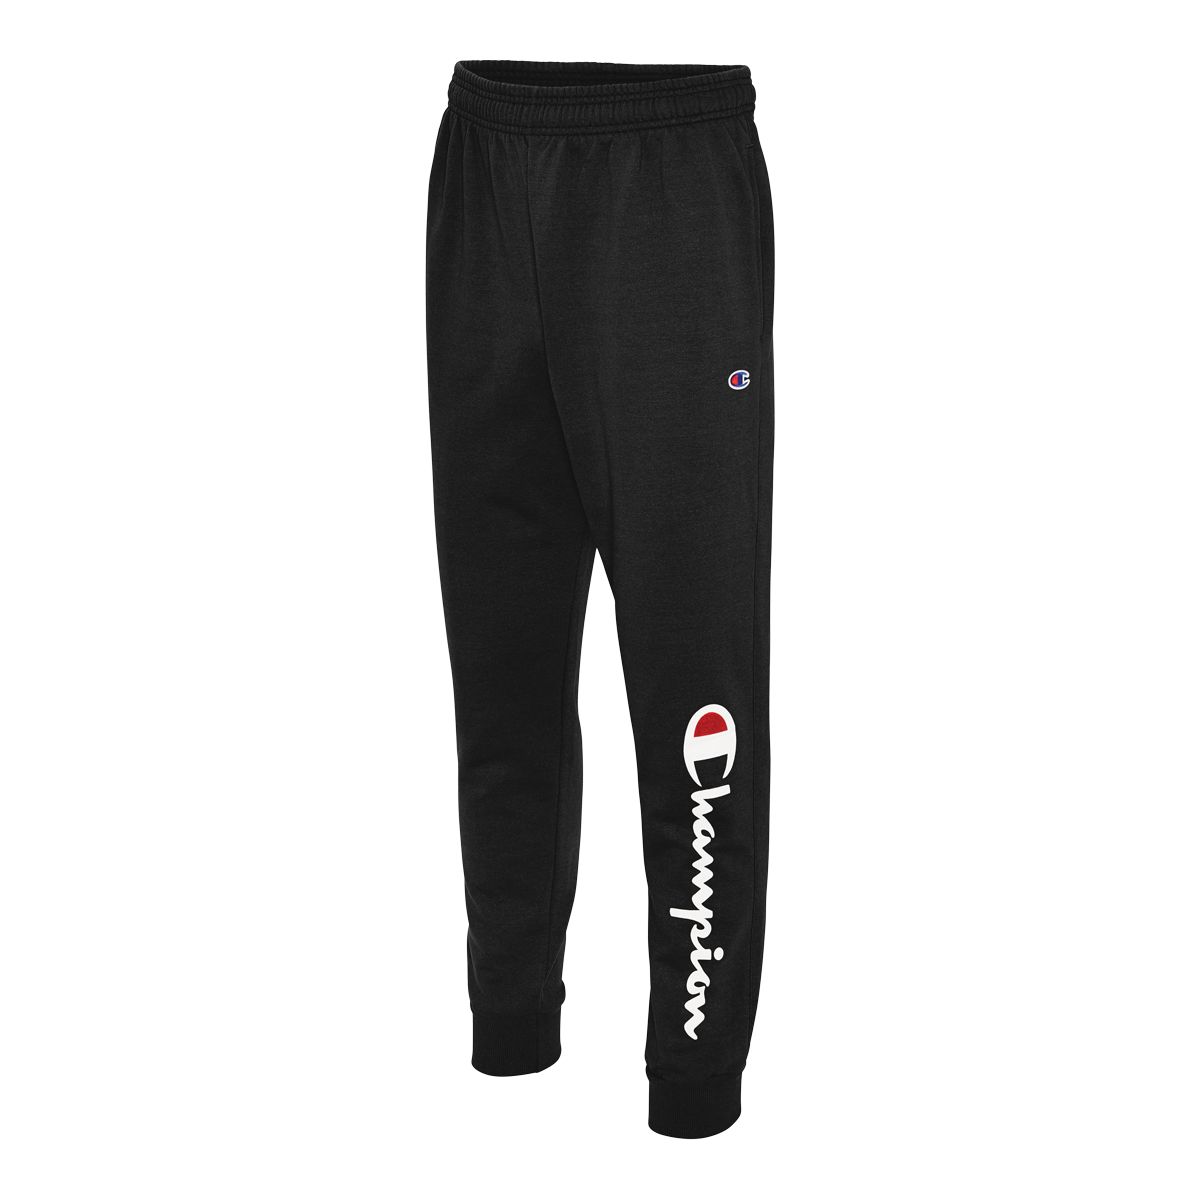  Powerblend, Fleece, Warm And Comfortable Joggers